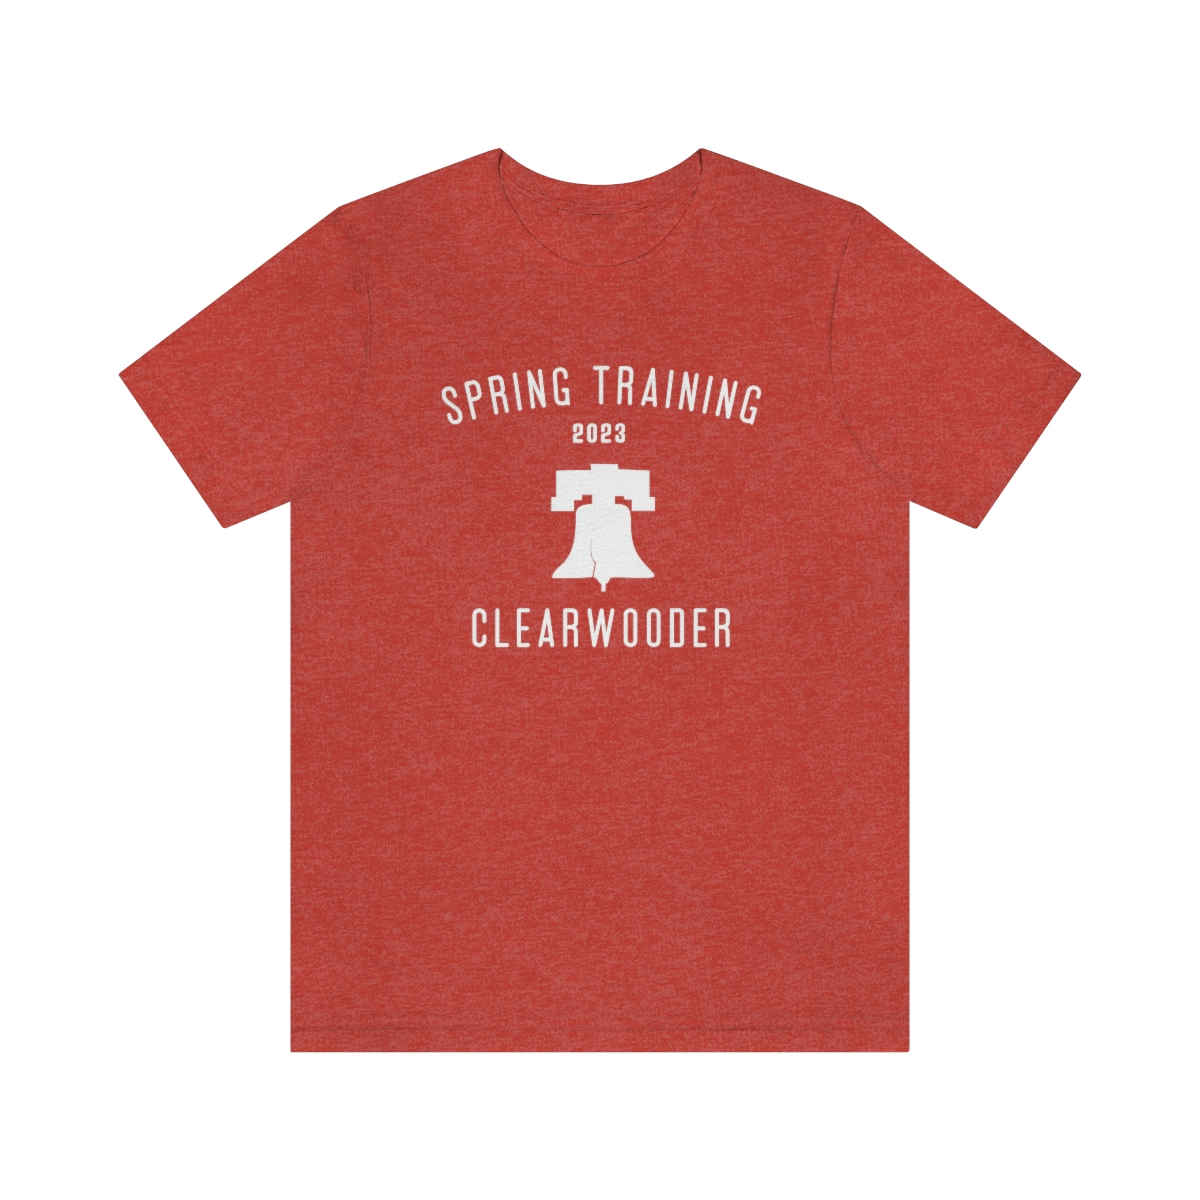 Phillies Clearwooder Spring Training Shirt